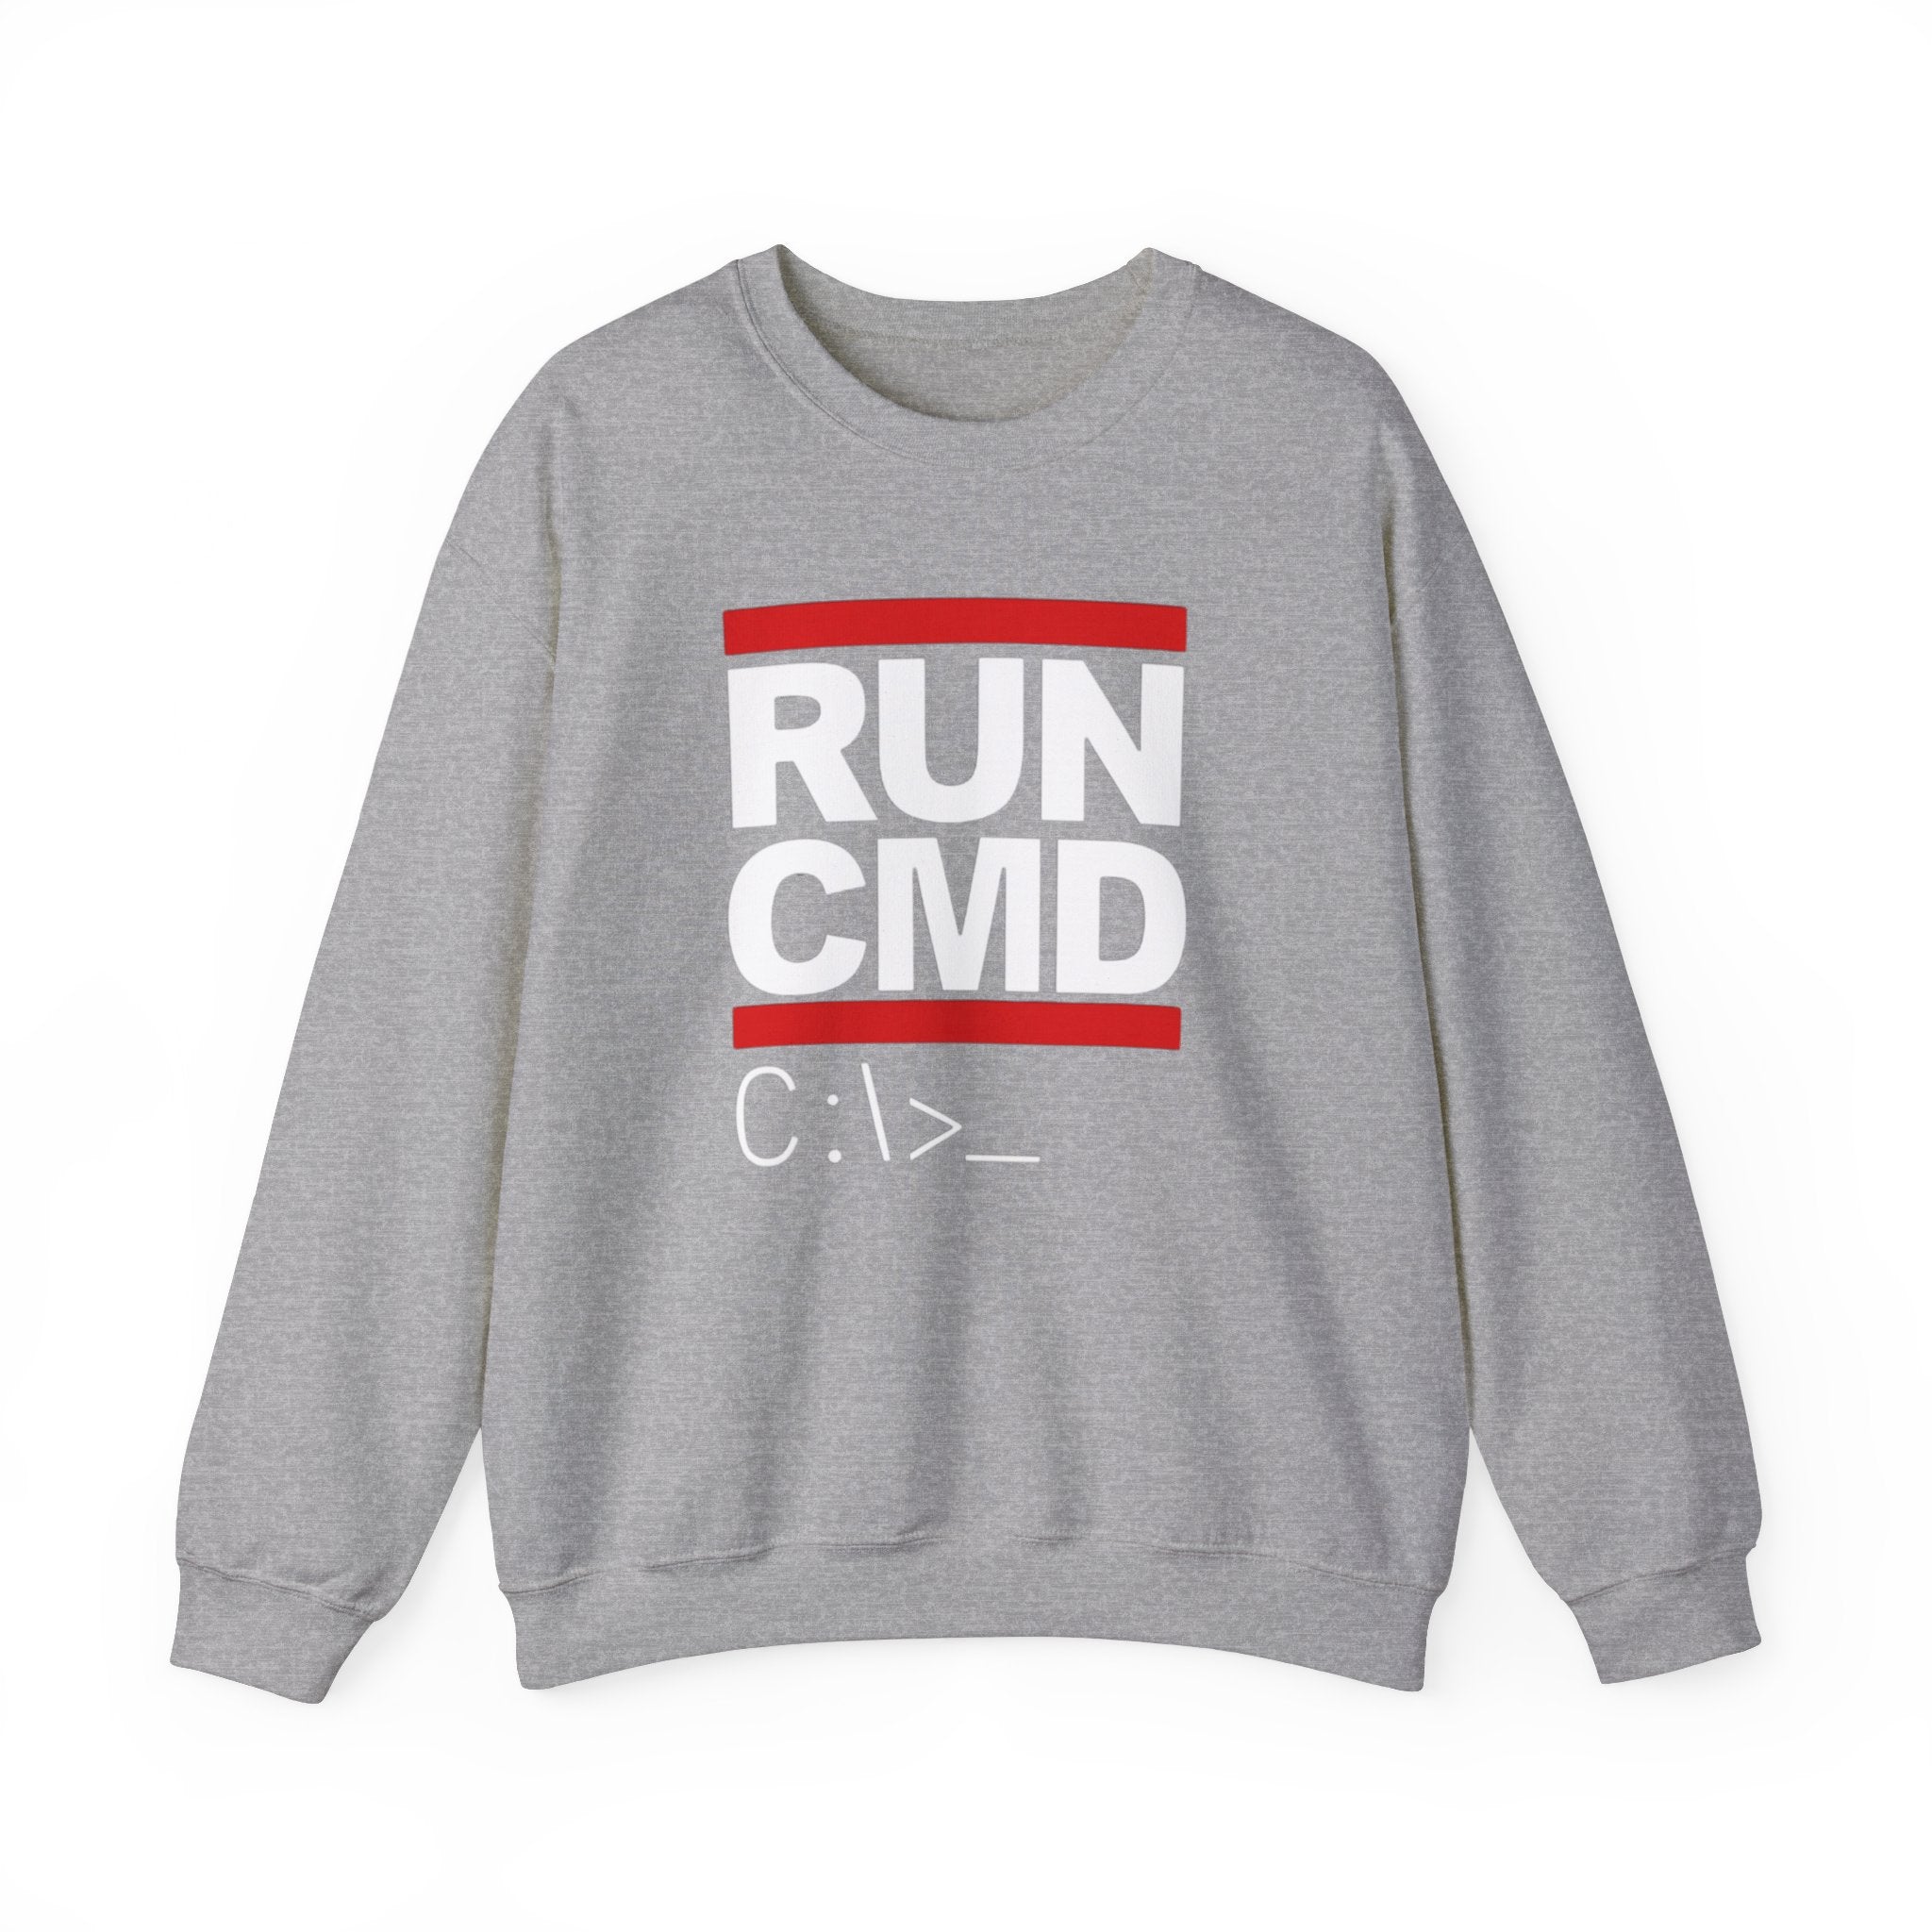 RUN CMD - Sweatshirt featuring "RUN CMD" in bold white and red text on the front, above a "C:\>" command prompt symbol. Offers ultimate comfort and style for tech enthusiasts.